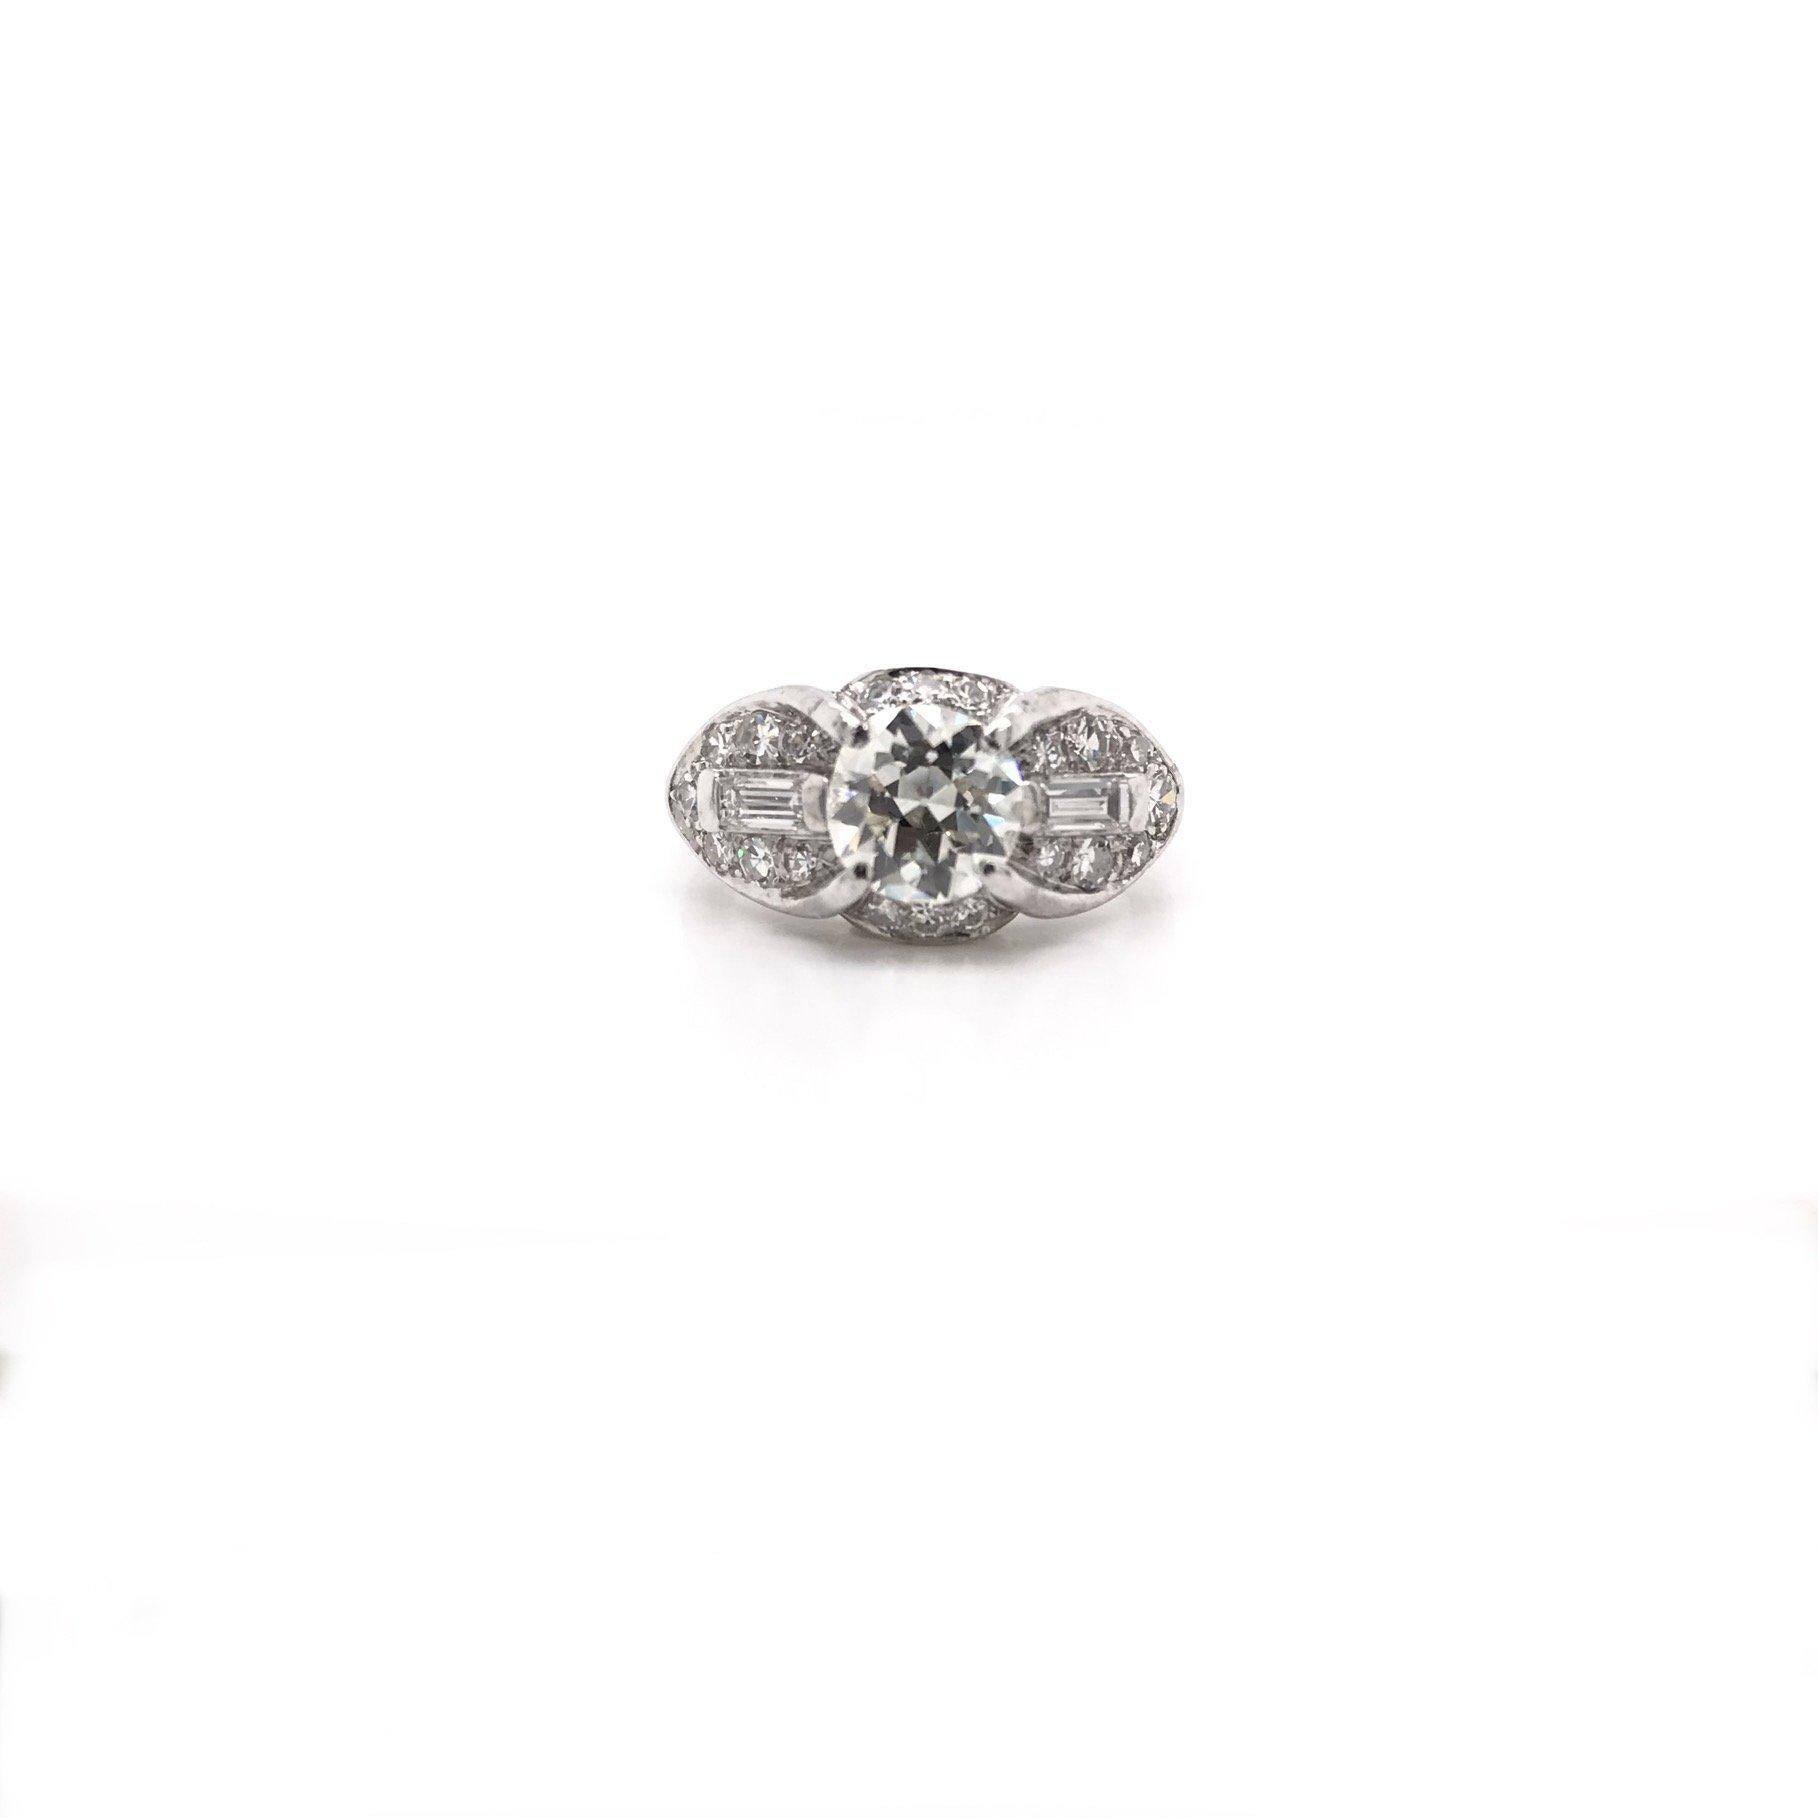 This diamond platinum ring is an absolute showstopper! This ring was skillfully handcrafted sometime during the Art Deco design period ( 1920-1940 ). This diamond ring has a lot of contrast and fire making it really stand out. The center diamond